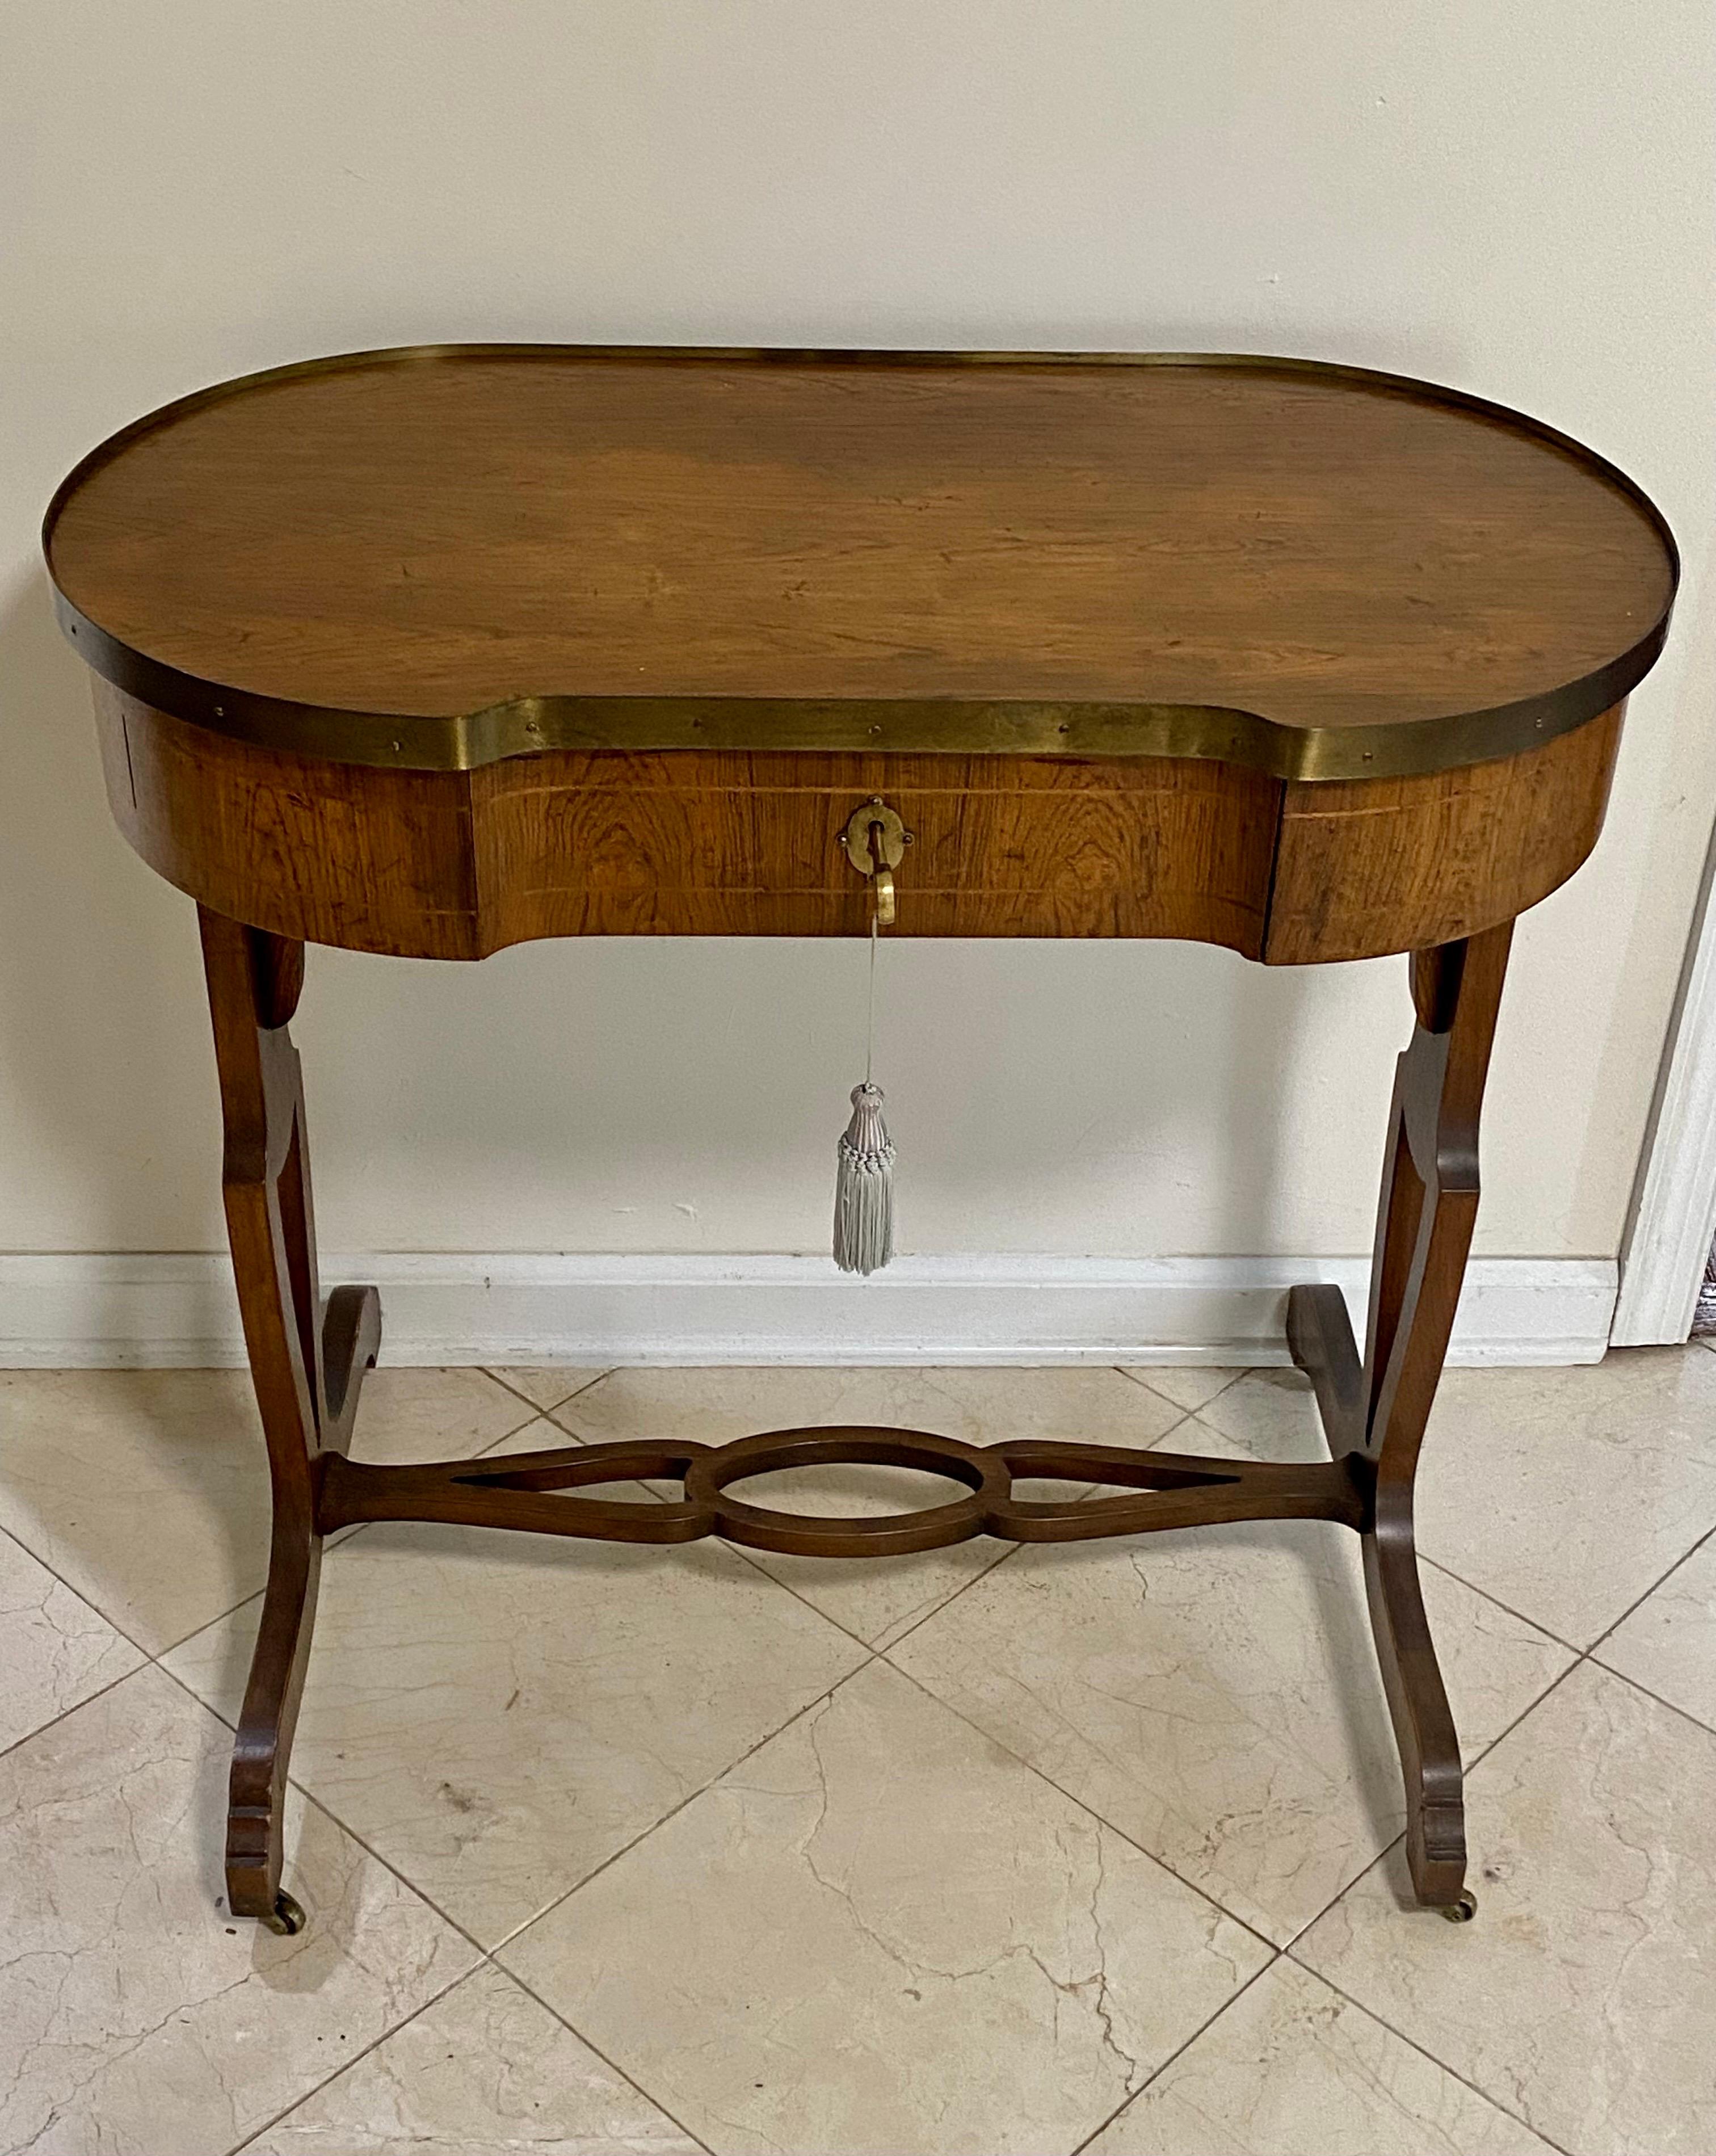 Baker Neoclassic style rosewood petite writing desk purchased from the Baker-Furniture in NYC in 1969. It is one of the pieces Baker selected for their Manor House line of Eighteenth Century style English furniture. Oblong in shape with brass trim